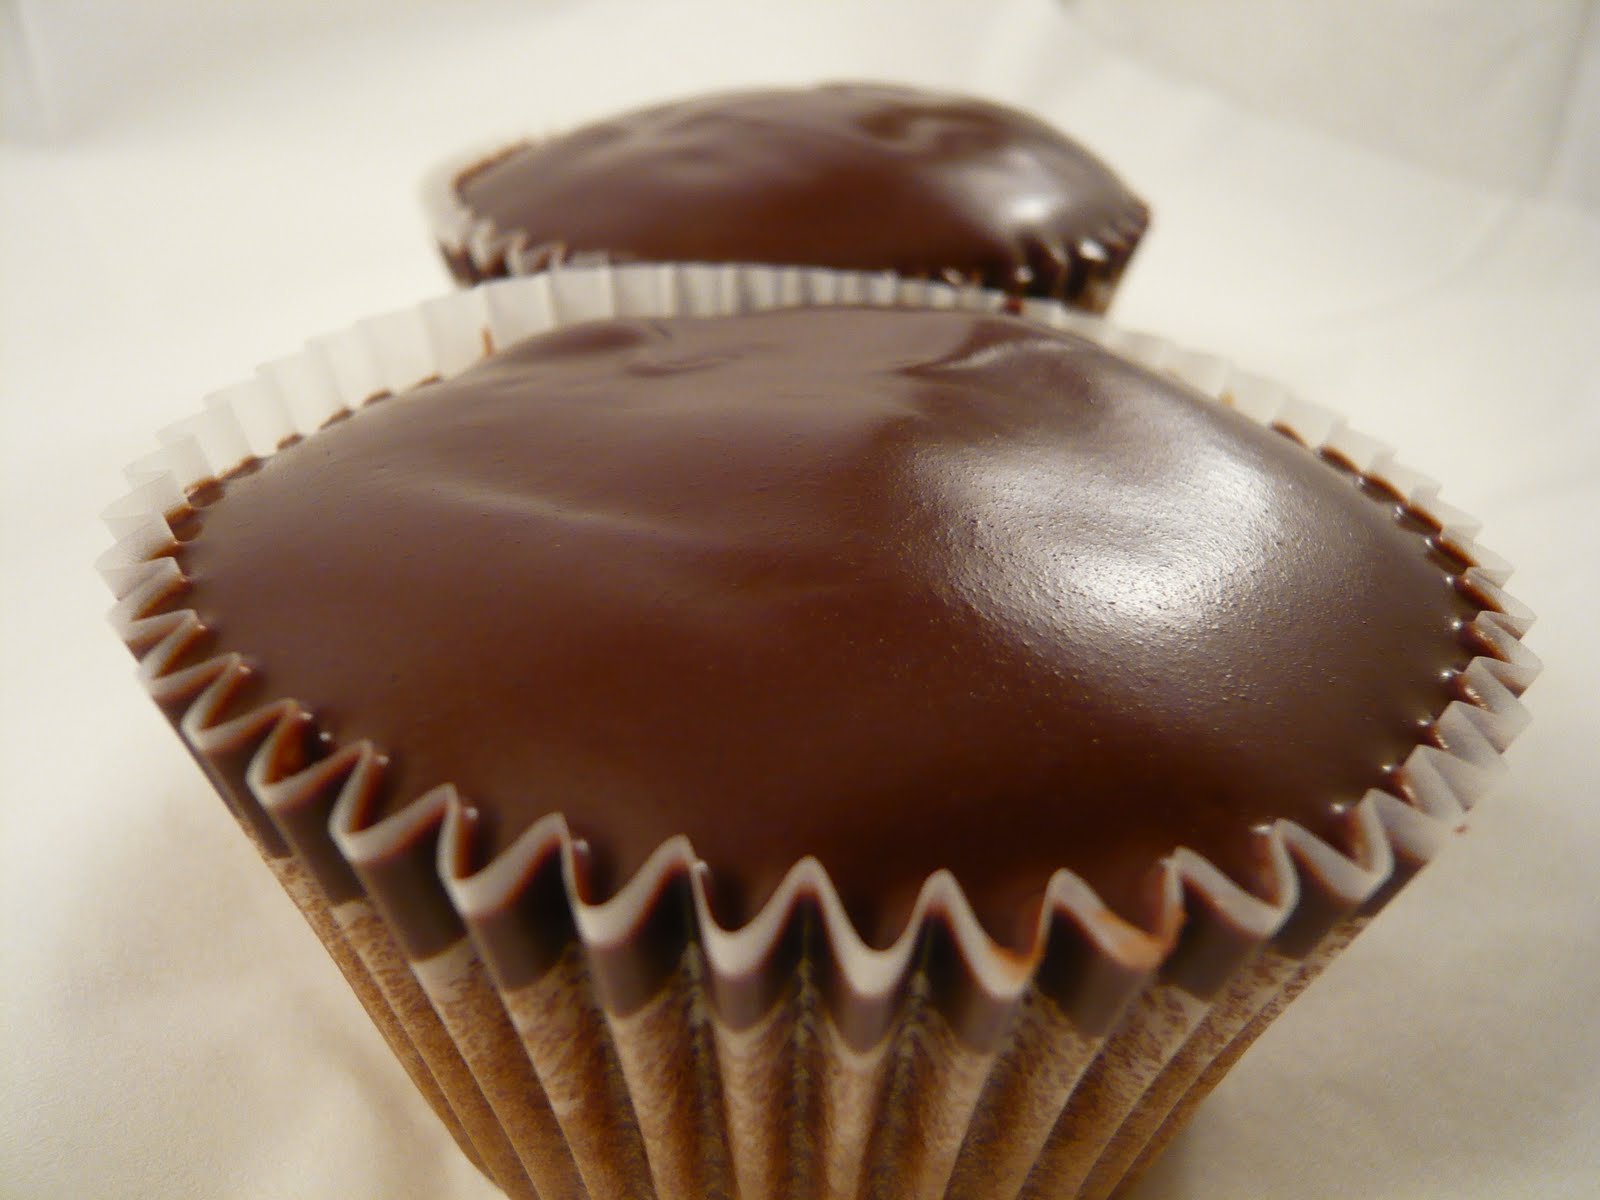 cupcakes moist chocolate to glaze cupcakes how make  Soft with recipe chocolate shiny fluffy Cooking: and